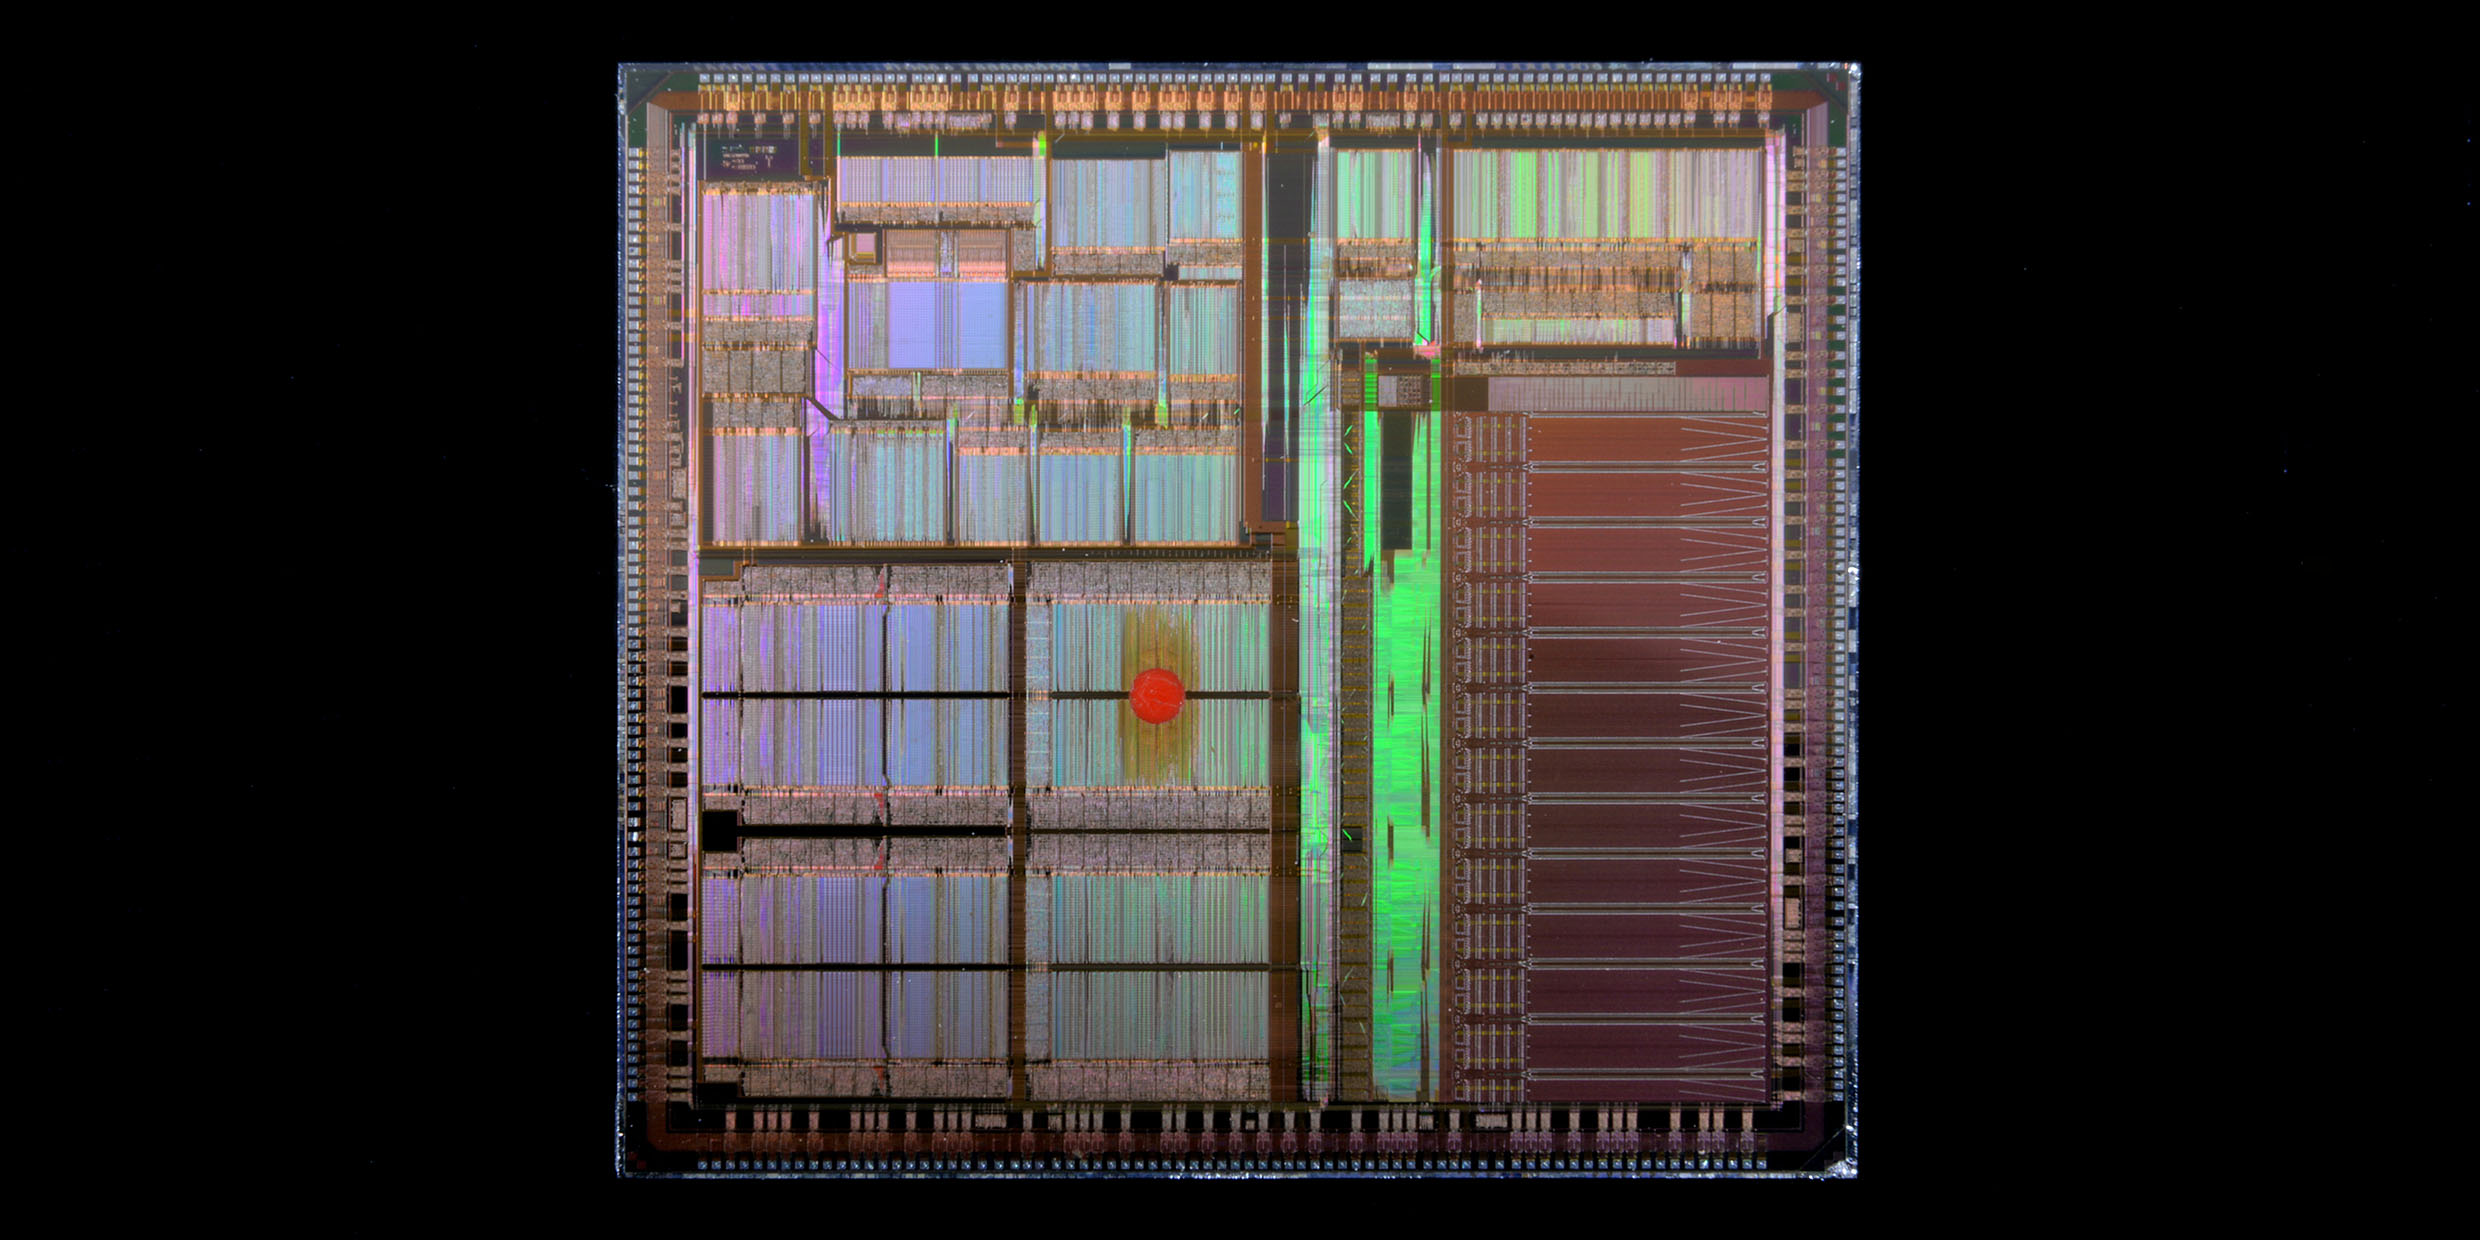 Close up image of a microprocessor computer chip